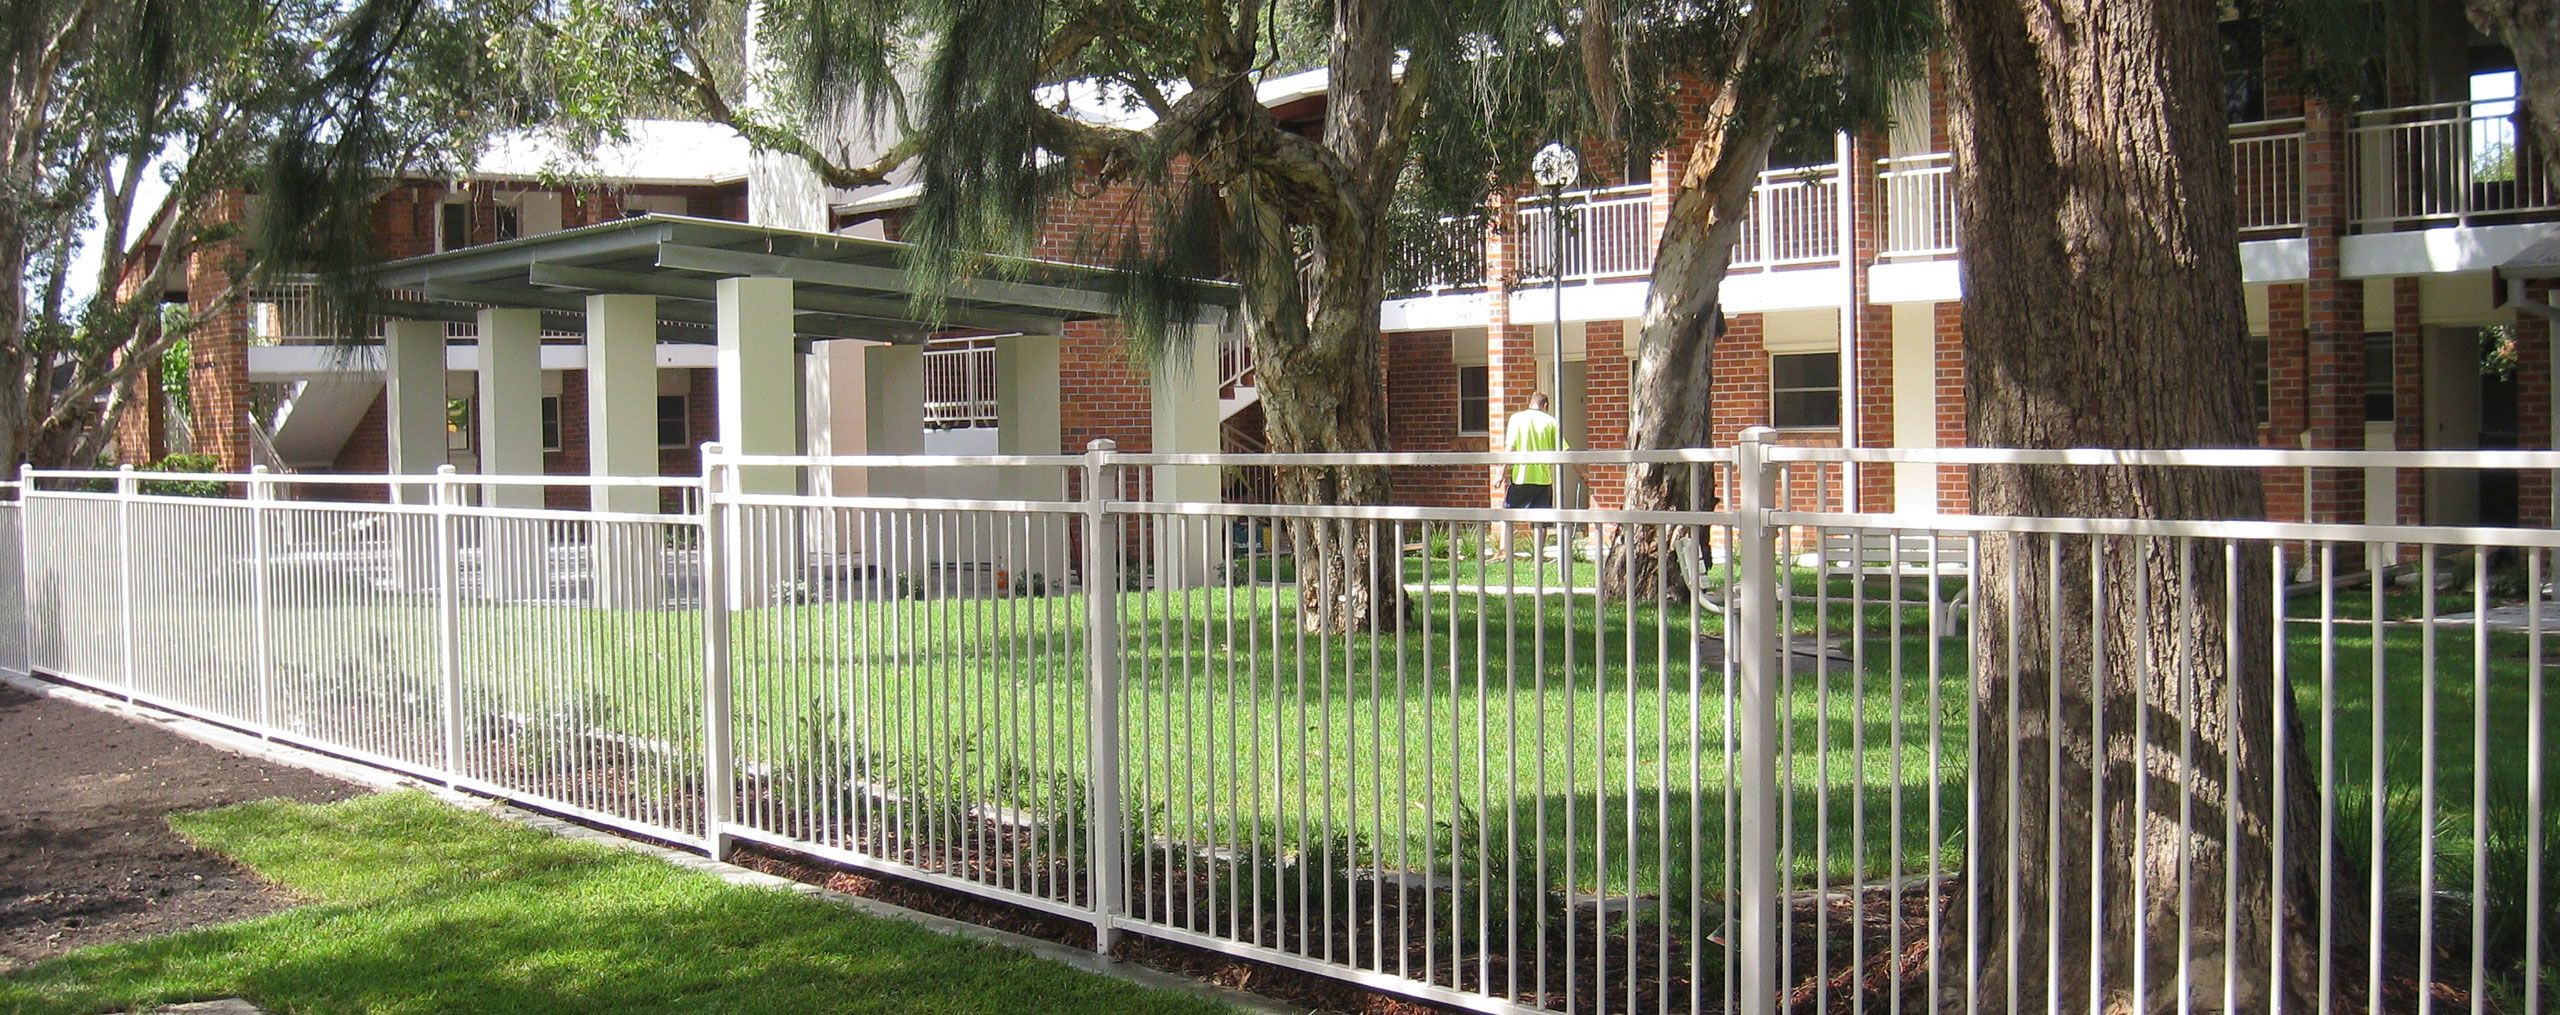 Pool Fencing and Decorative Fencing